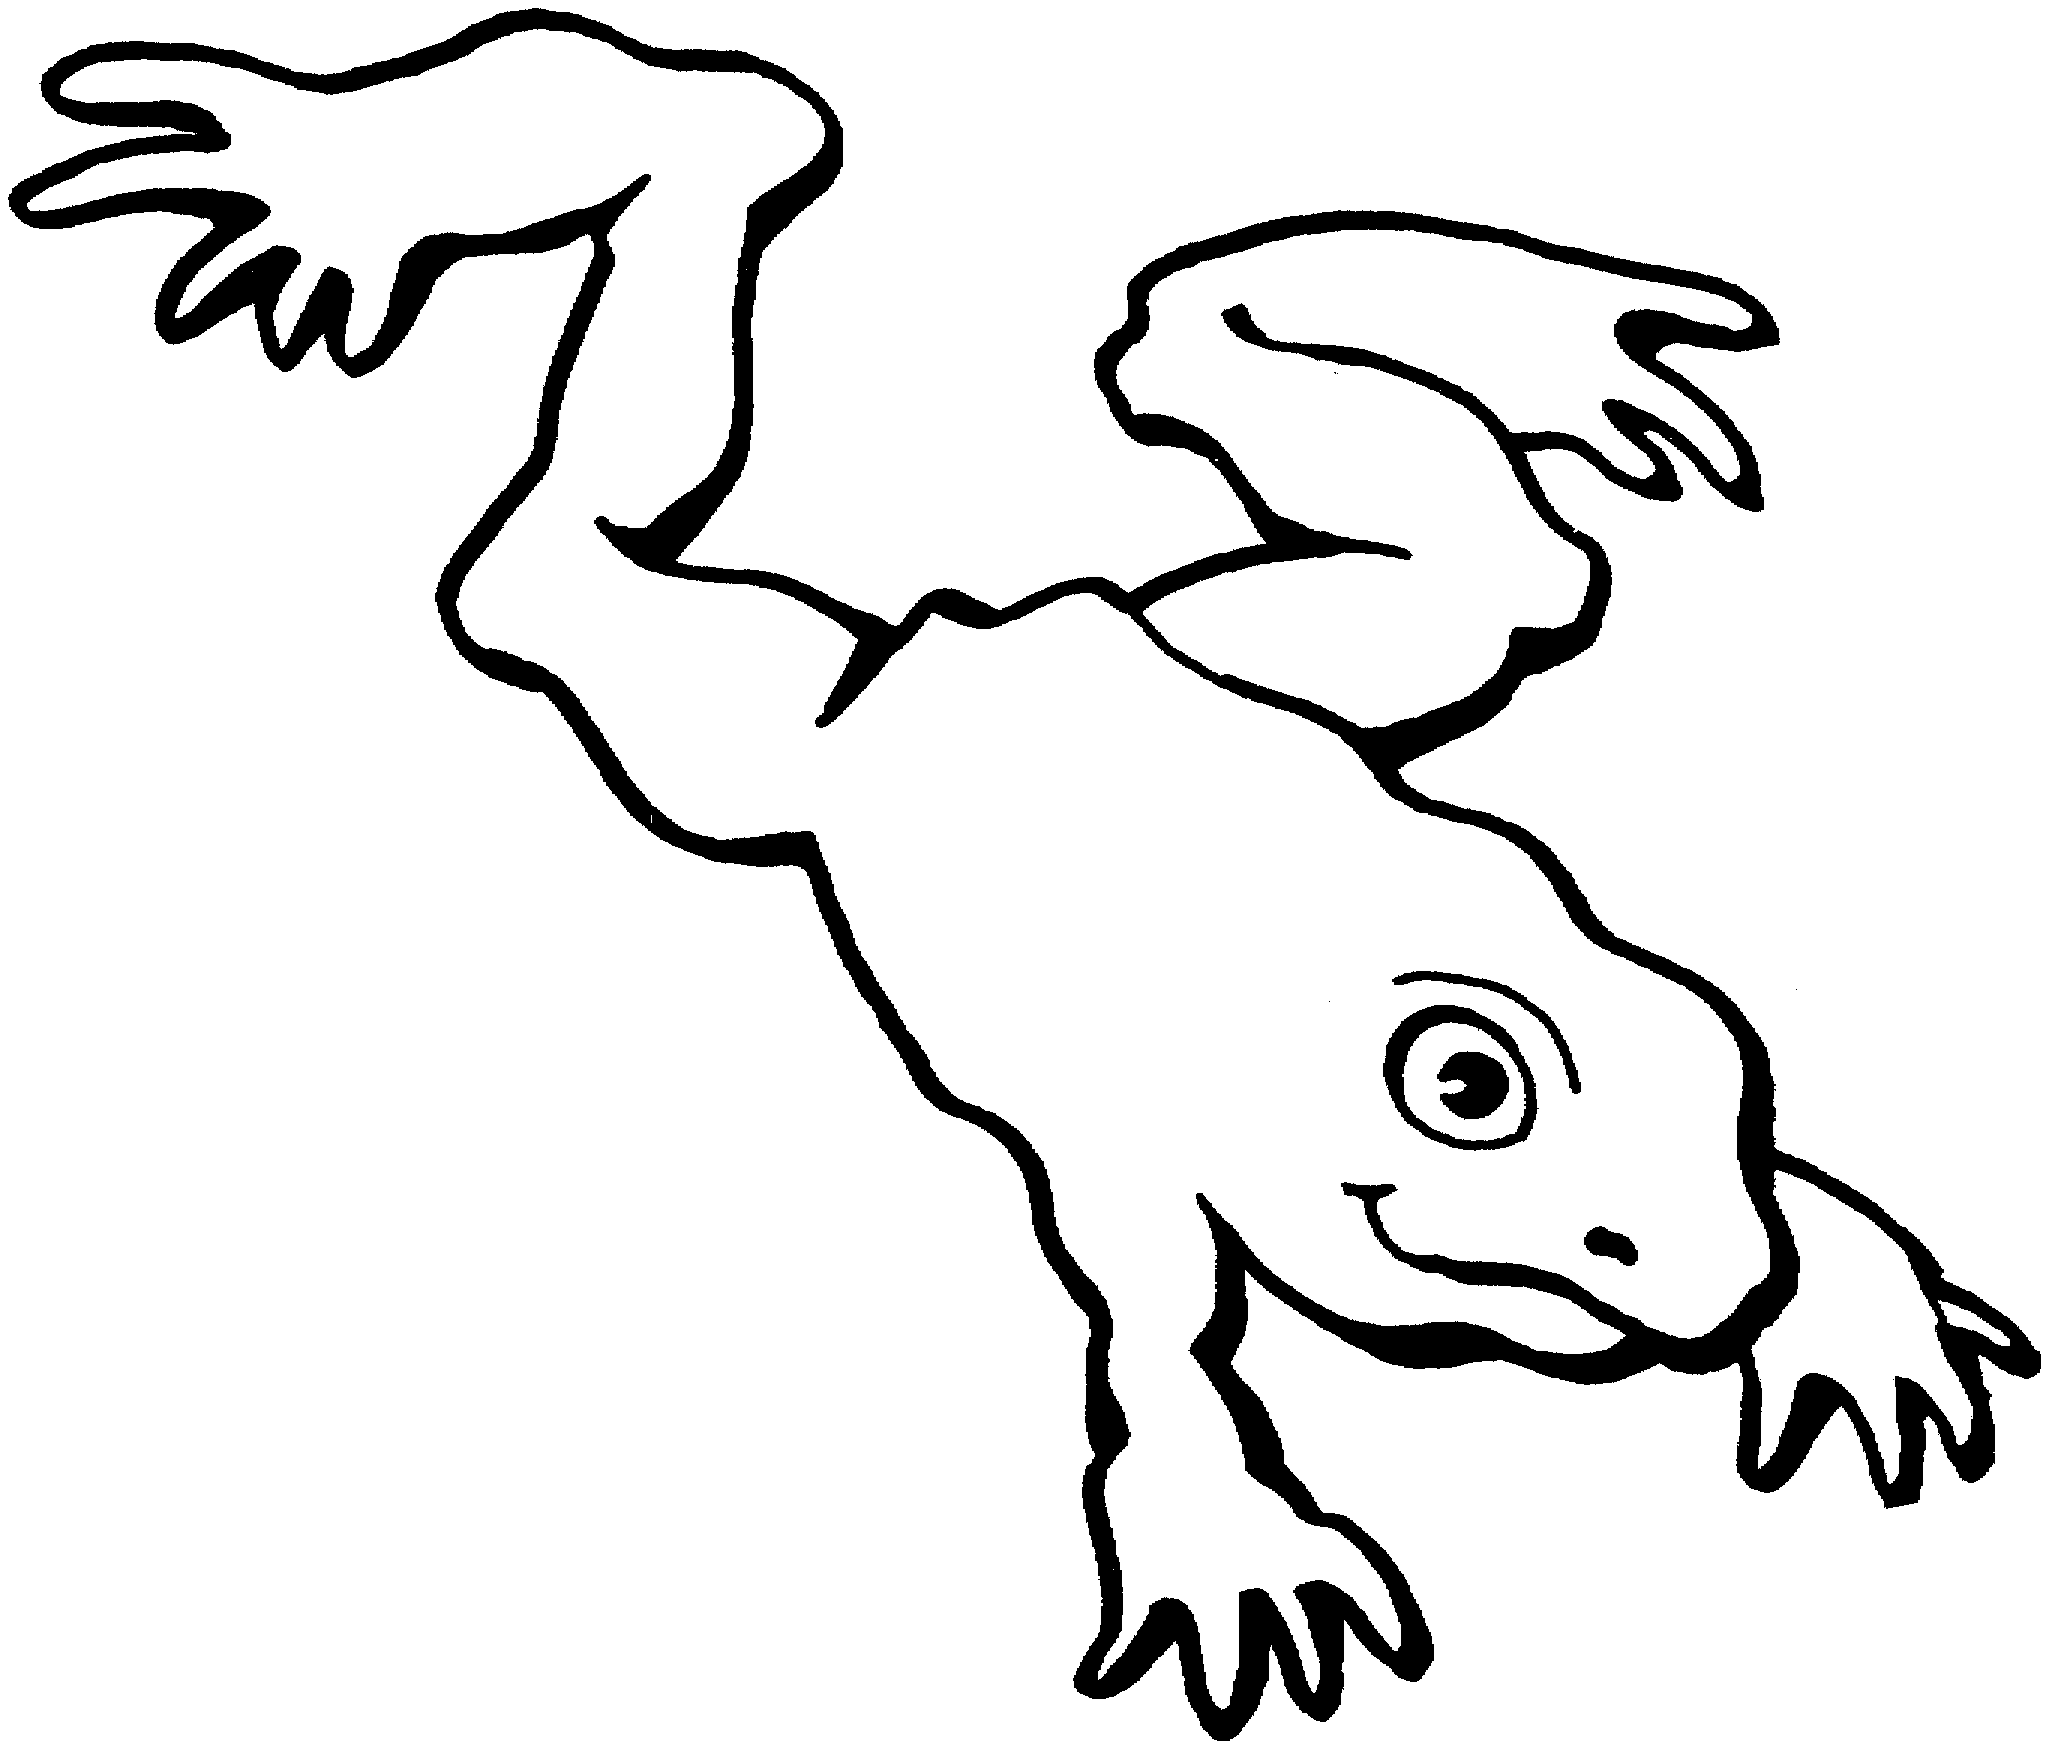 Jumping Frog Coloring Pages | Clipart Panda - Free Clipart Images